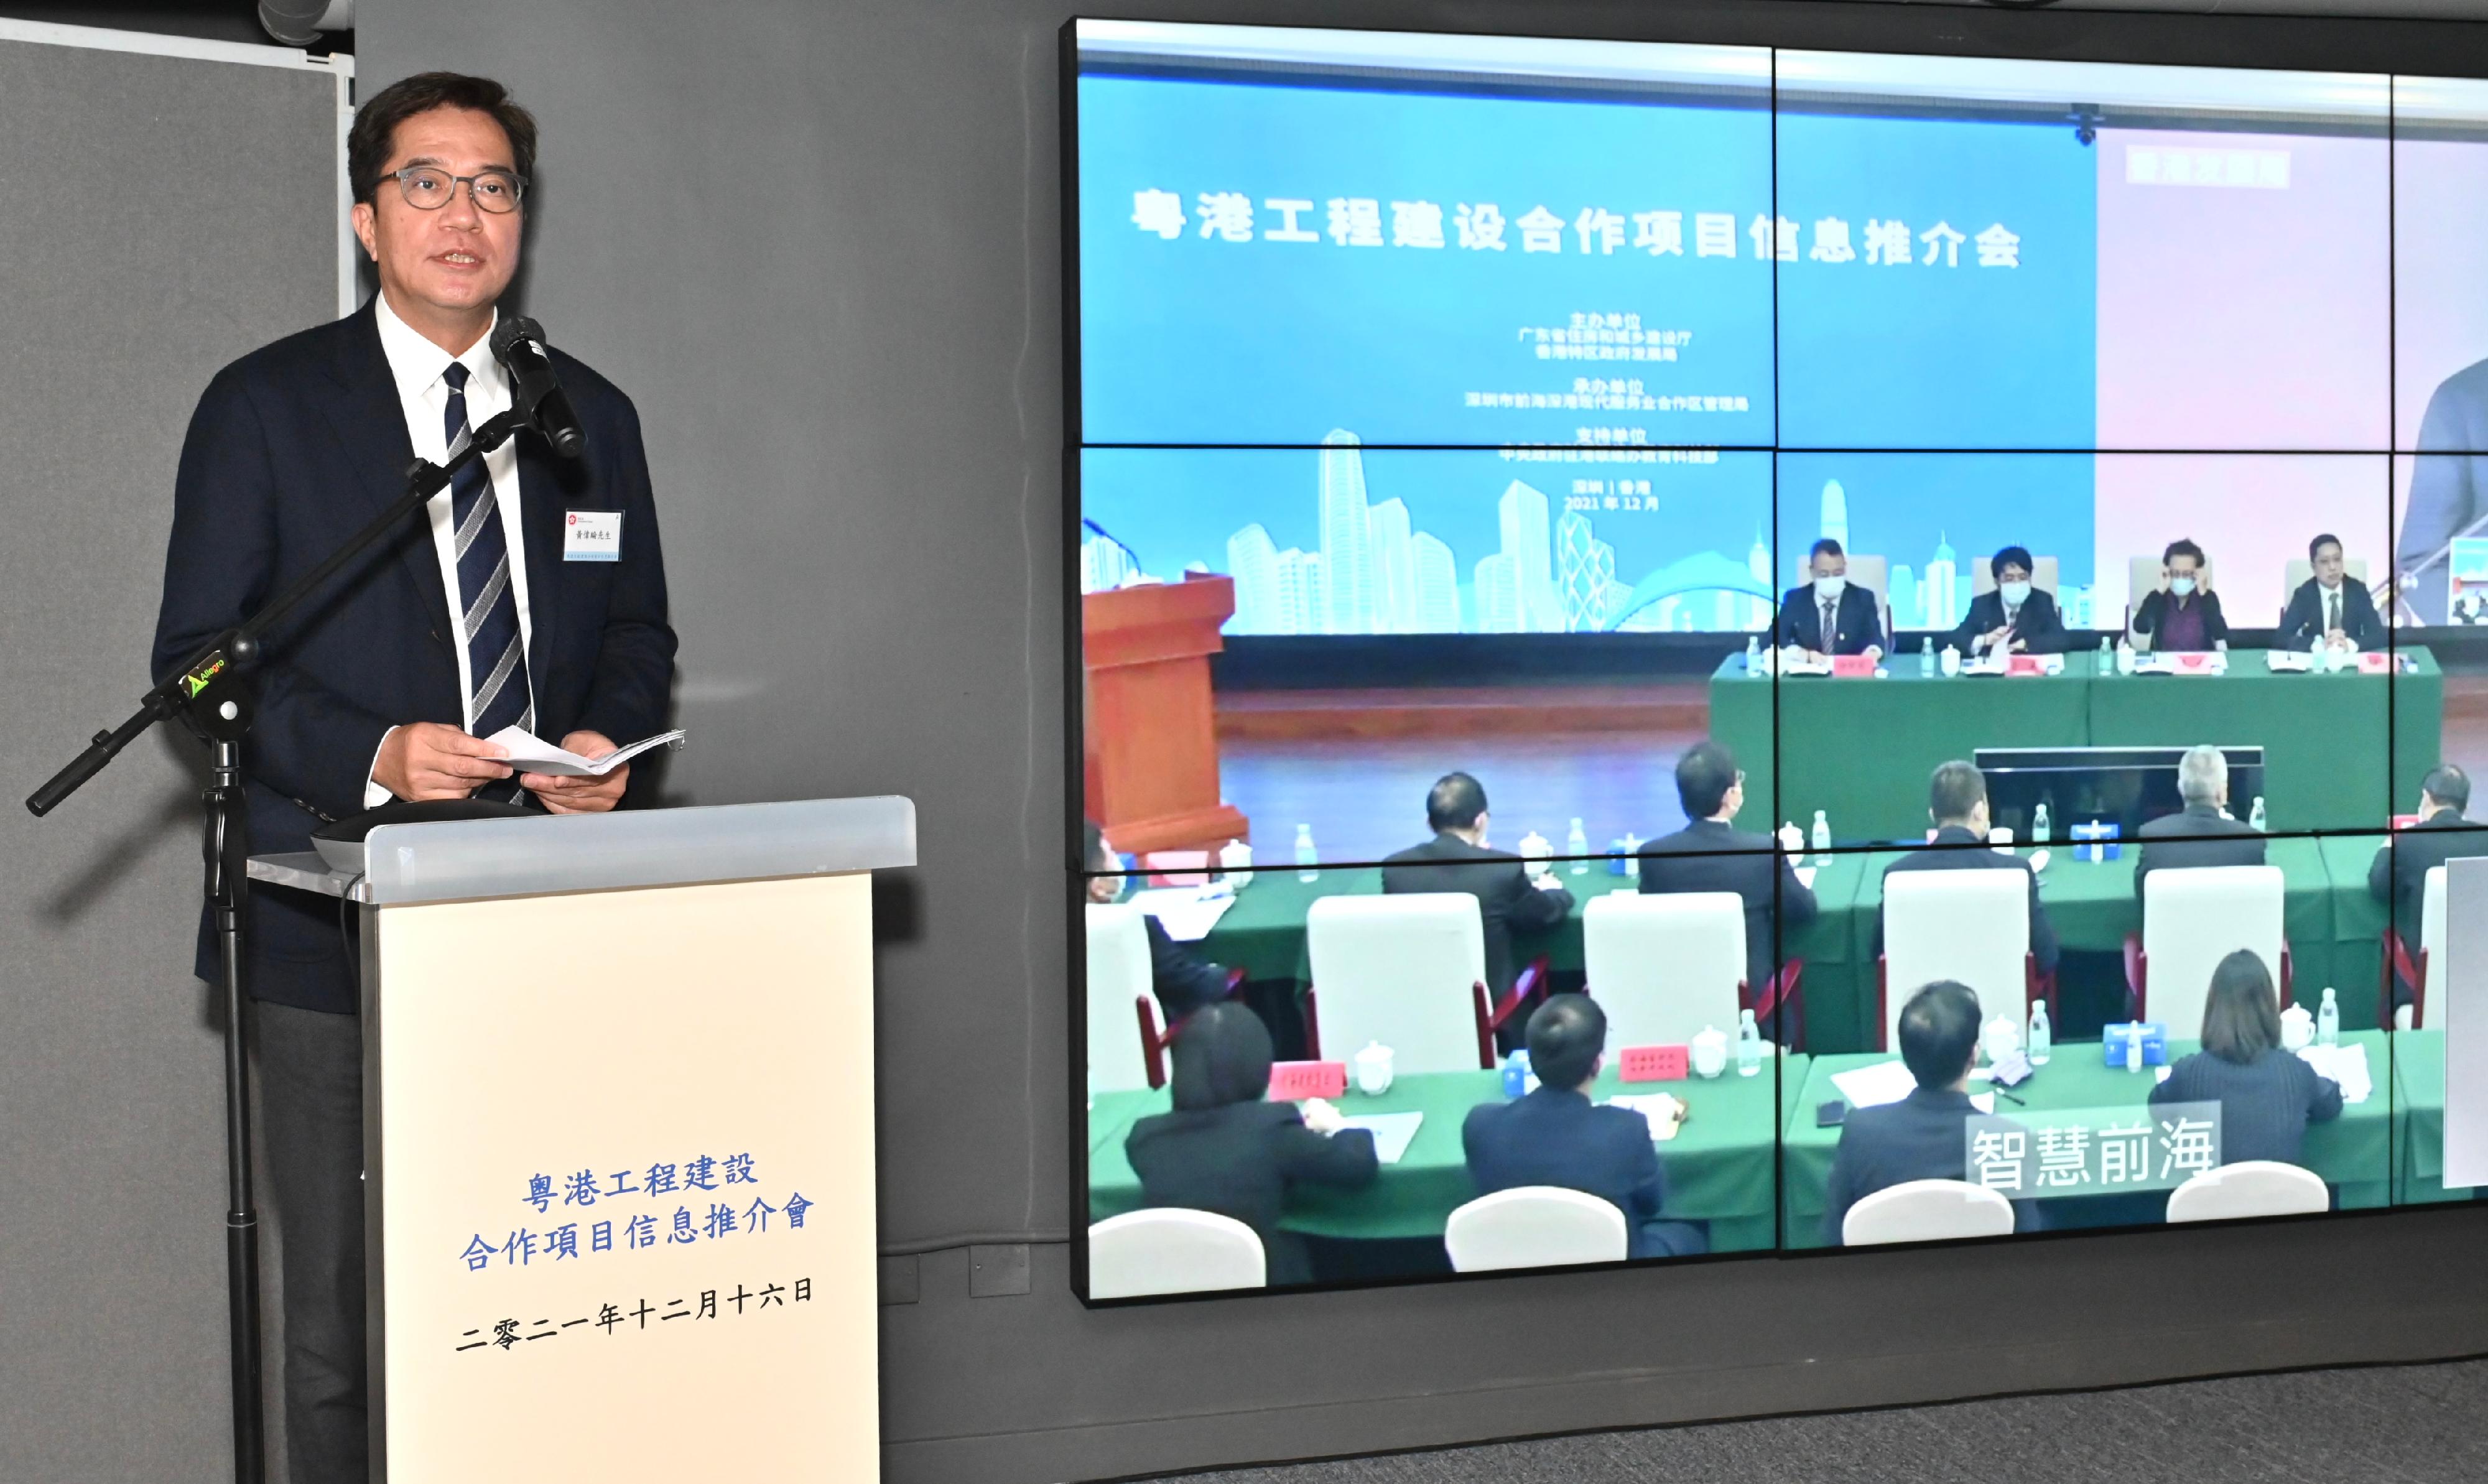 The Secretary for Development, Mr Michael Wong, speaks at the Guangdong-Hong Kong Cooperation Construction Projects Promotion Conference today (December 16).